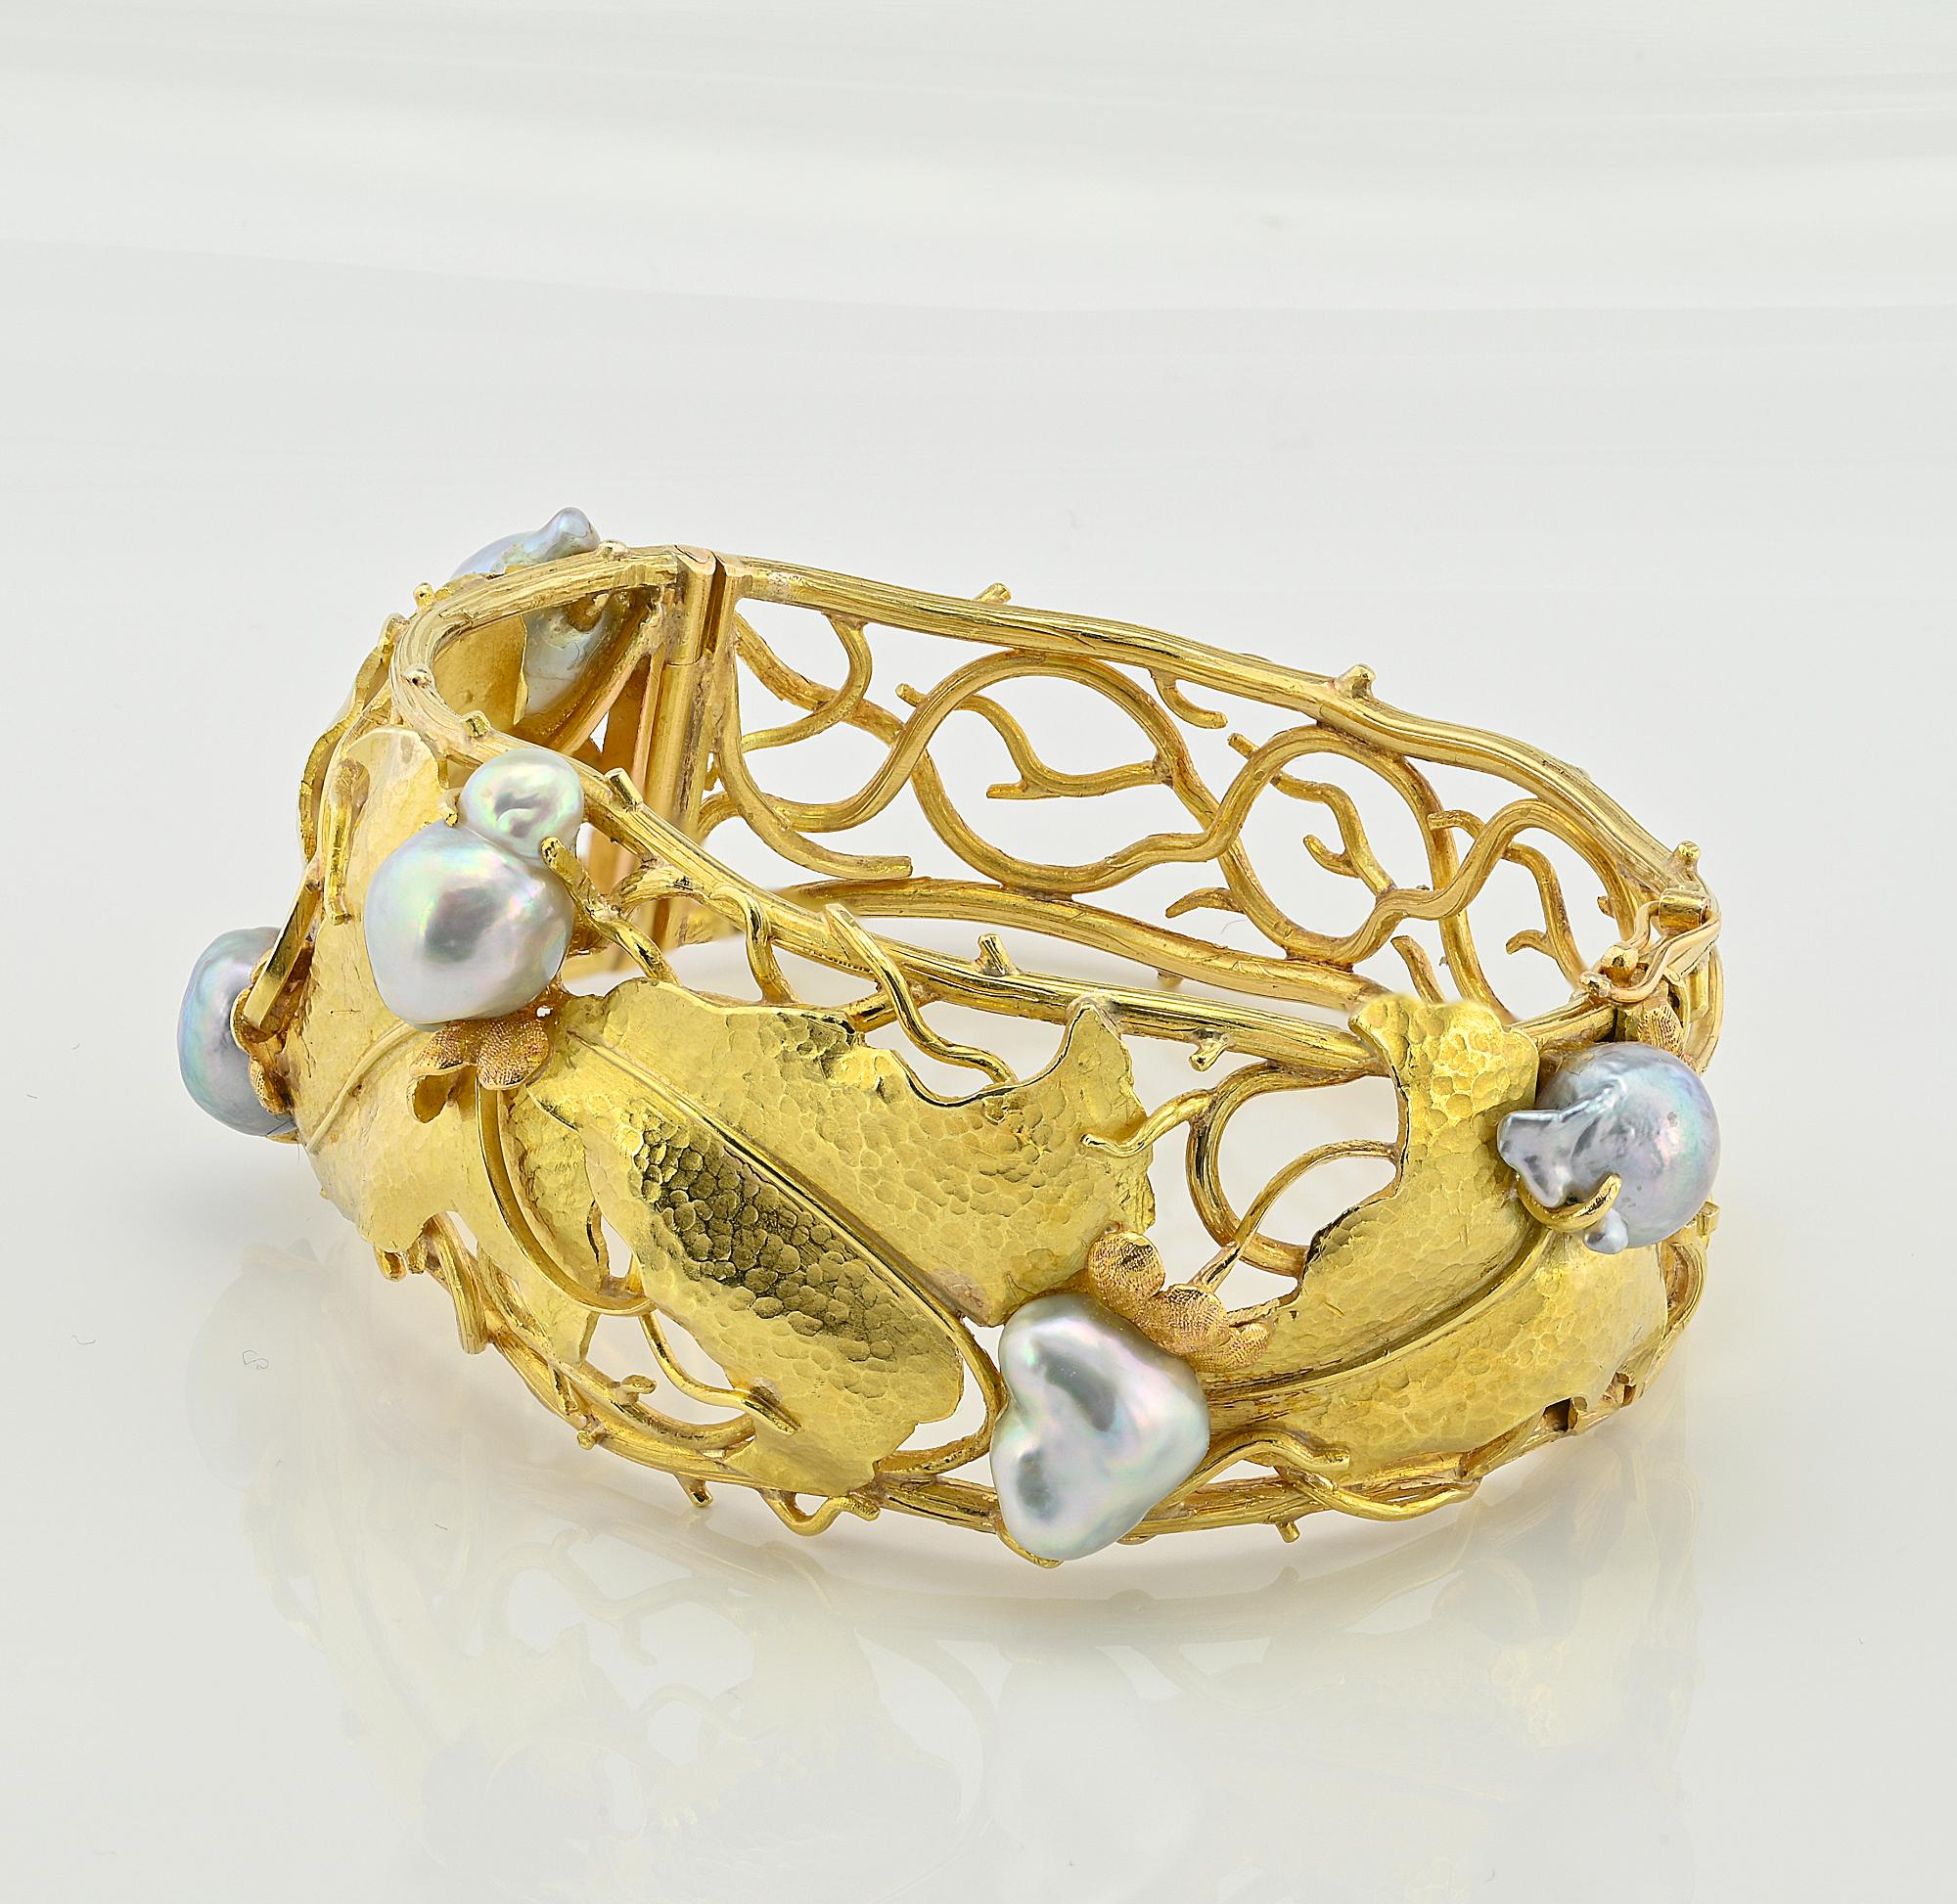  Signed Cecconi Leaf and Pearl 18 KT Mid-century Bangle For Sale 1